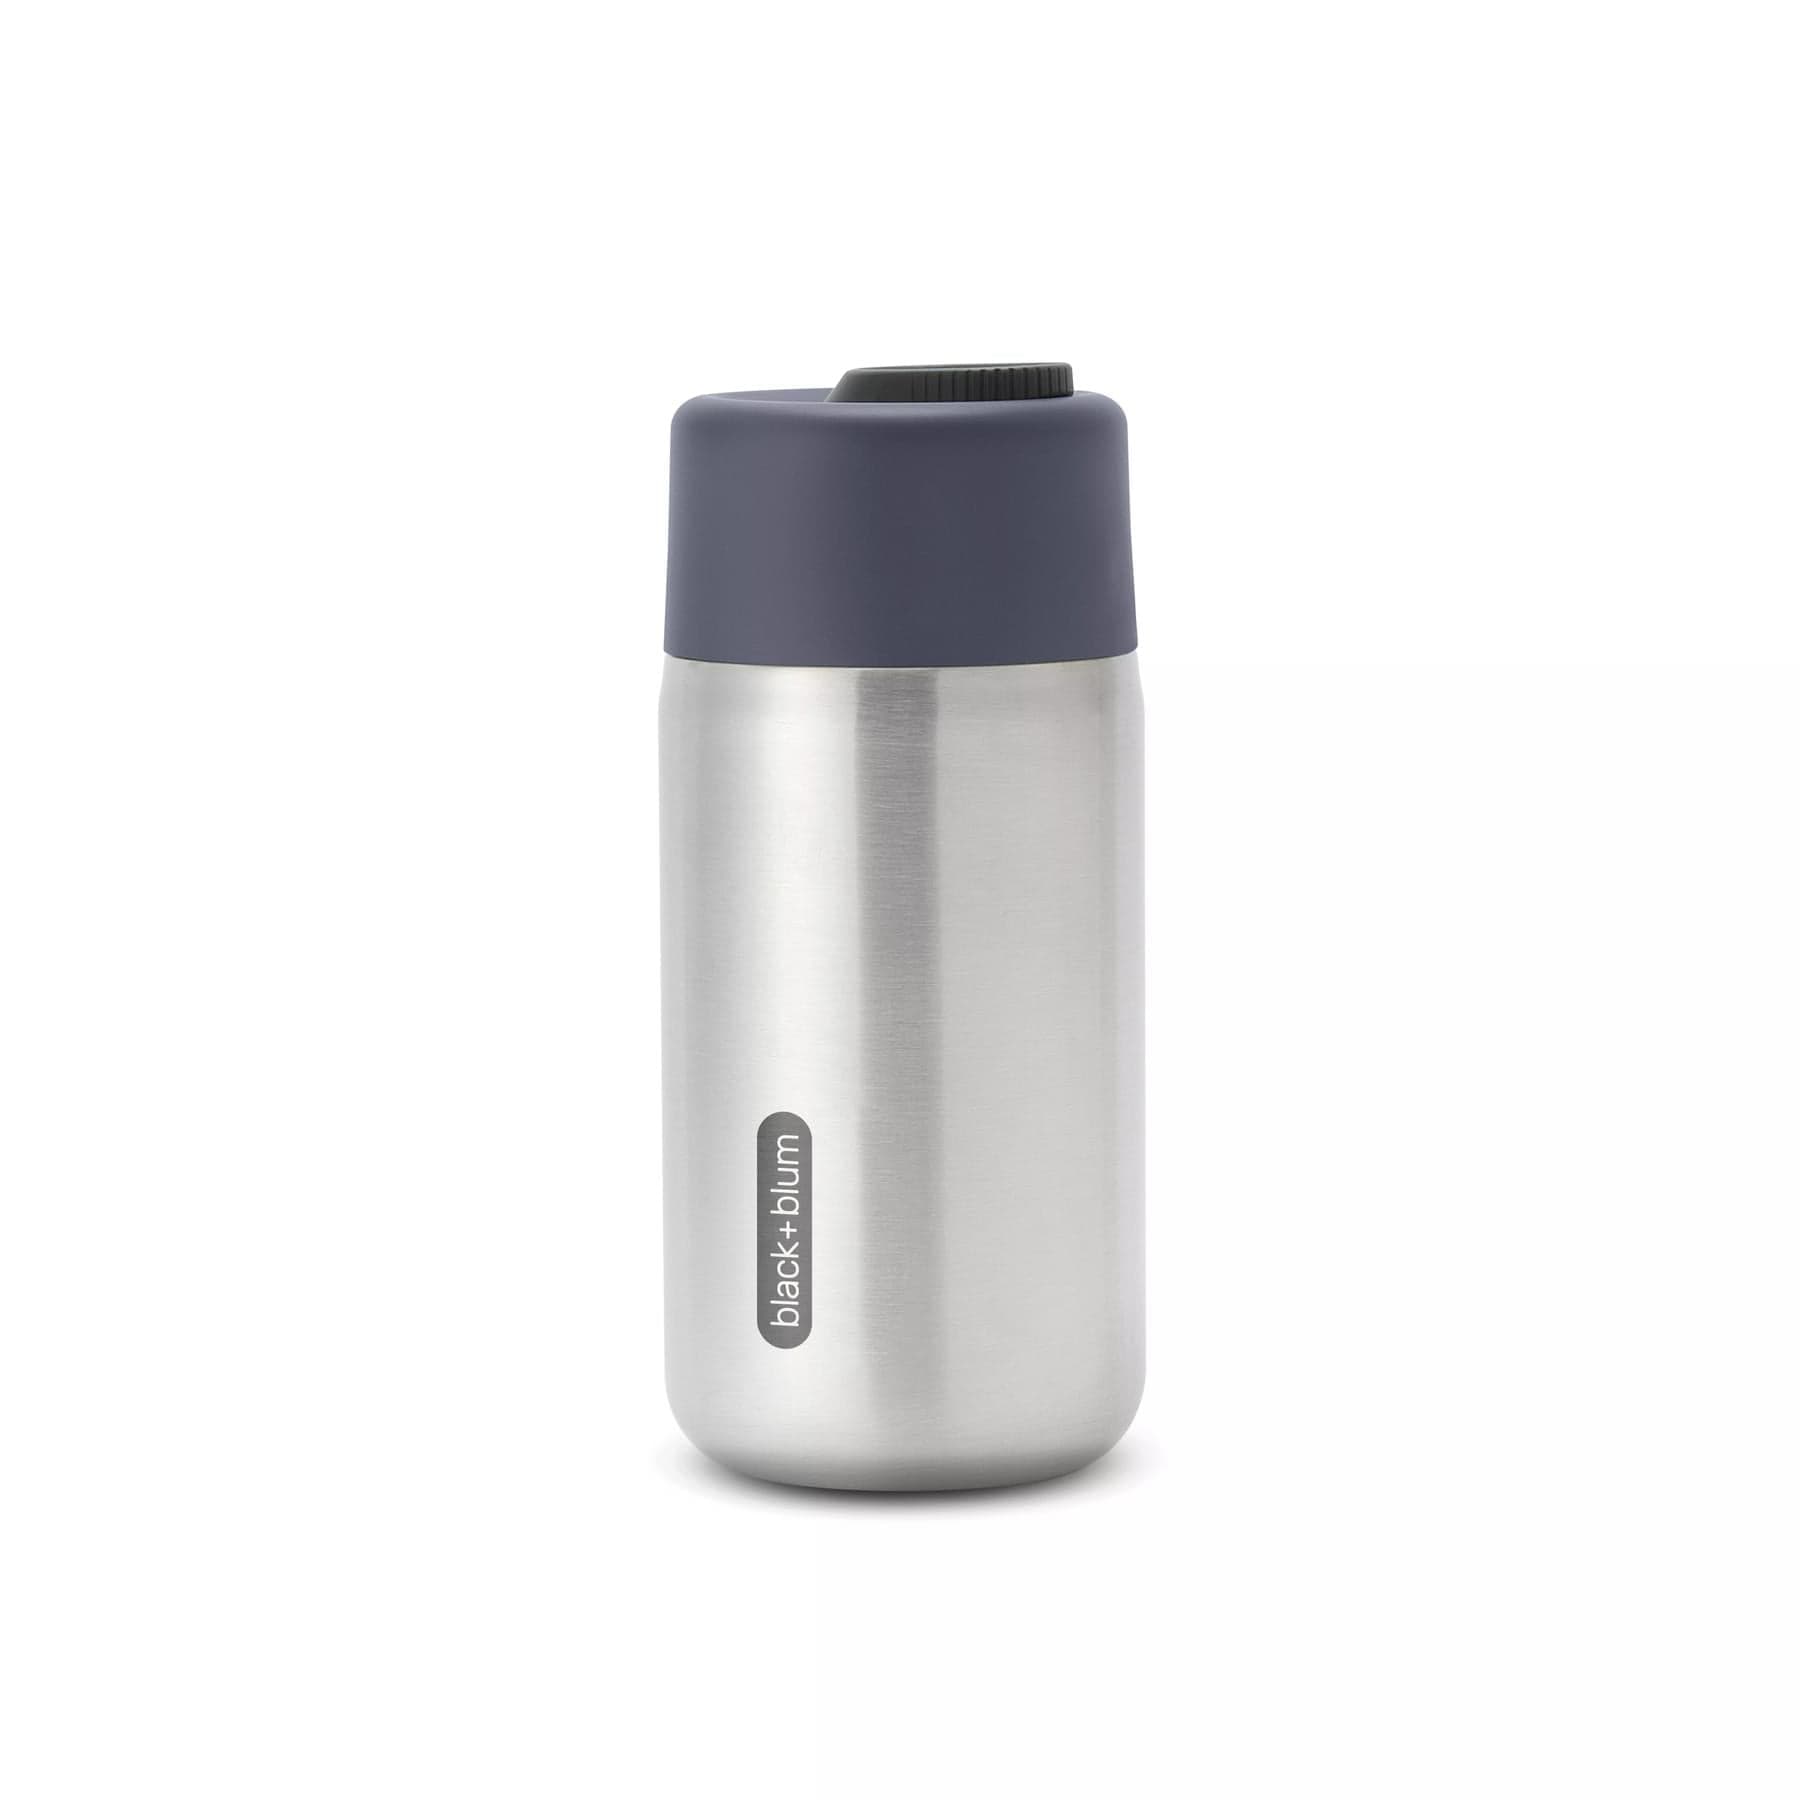 Stainless steel insulated travel mug with navy blue lid on white background.